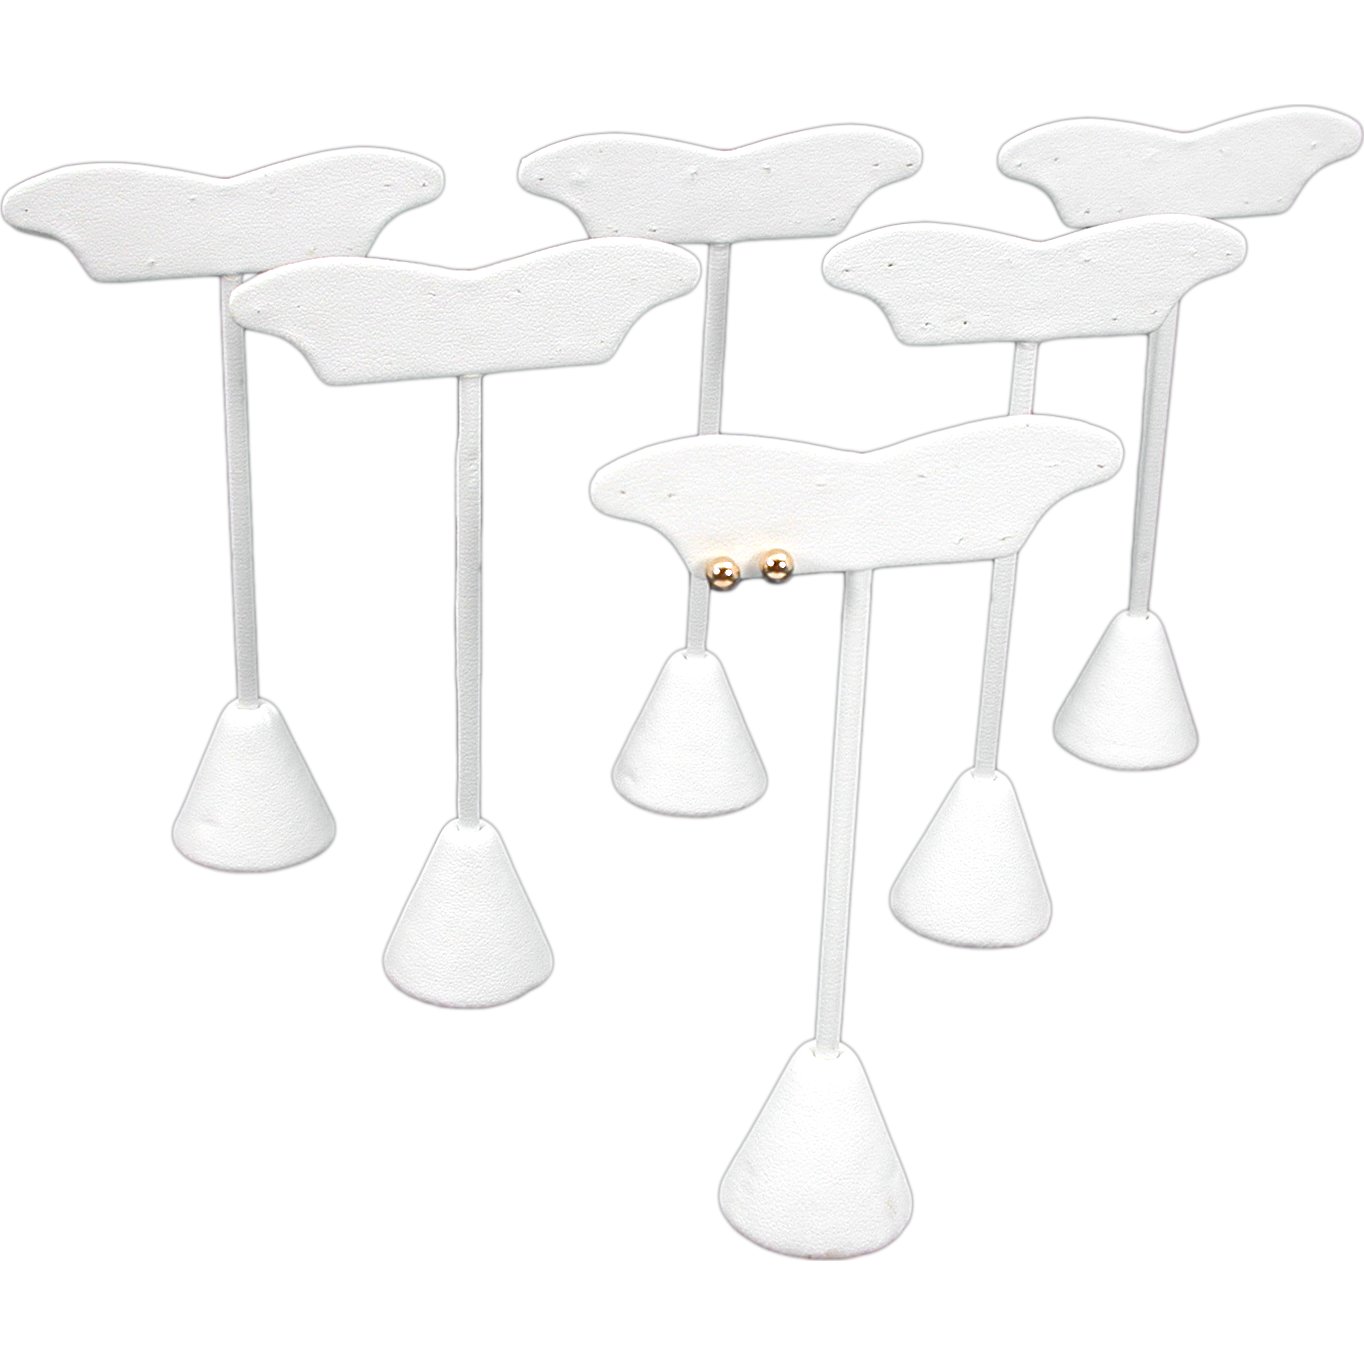 6 White Leather Earring Stands 5 Pairs Jewelry Displays